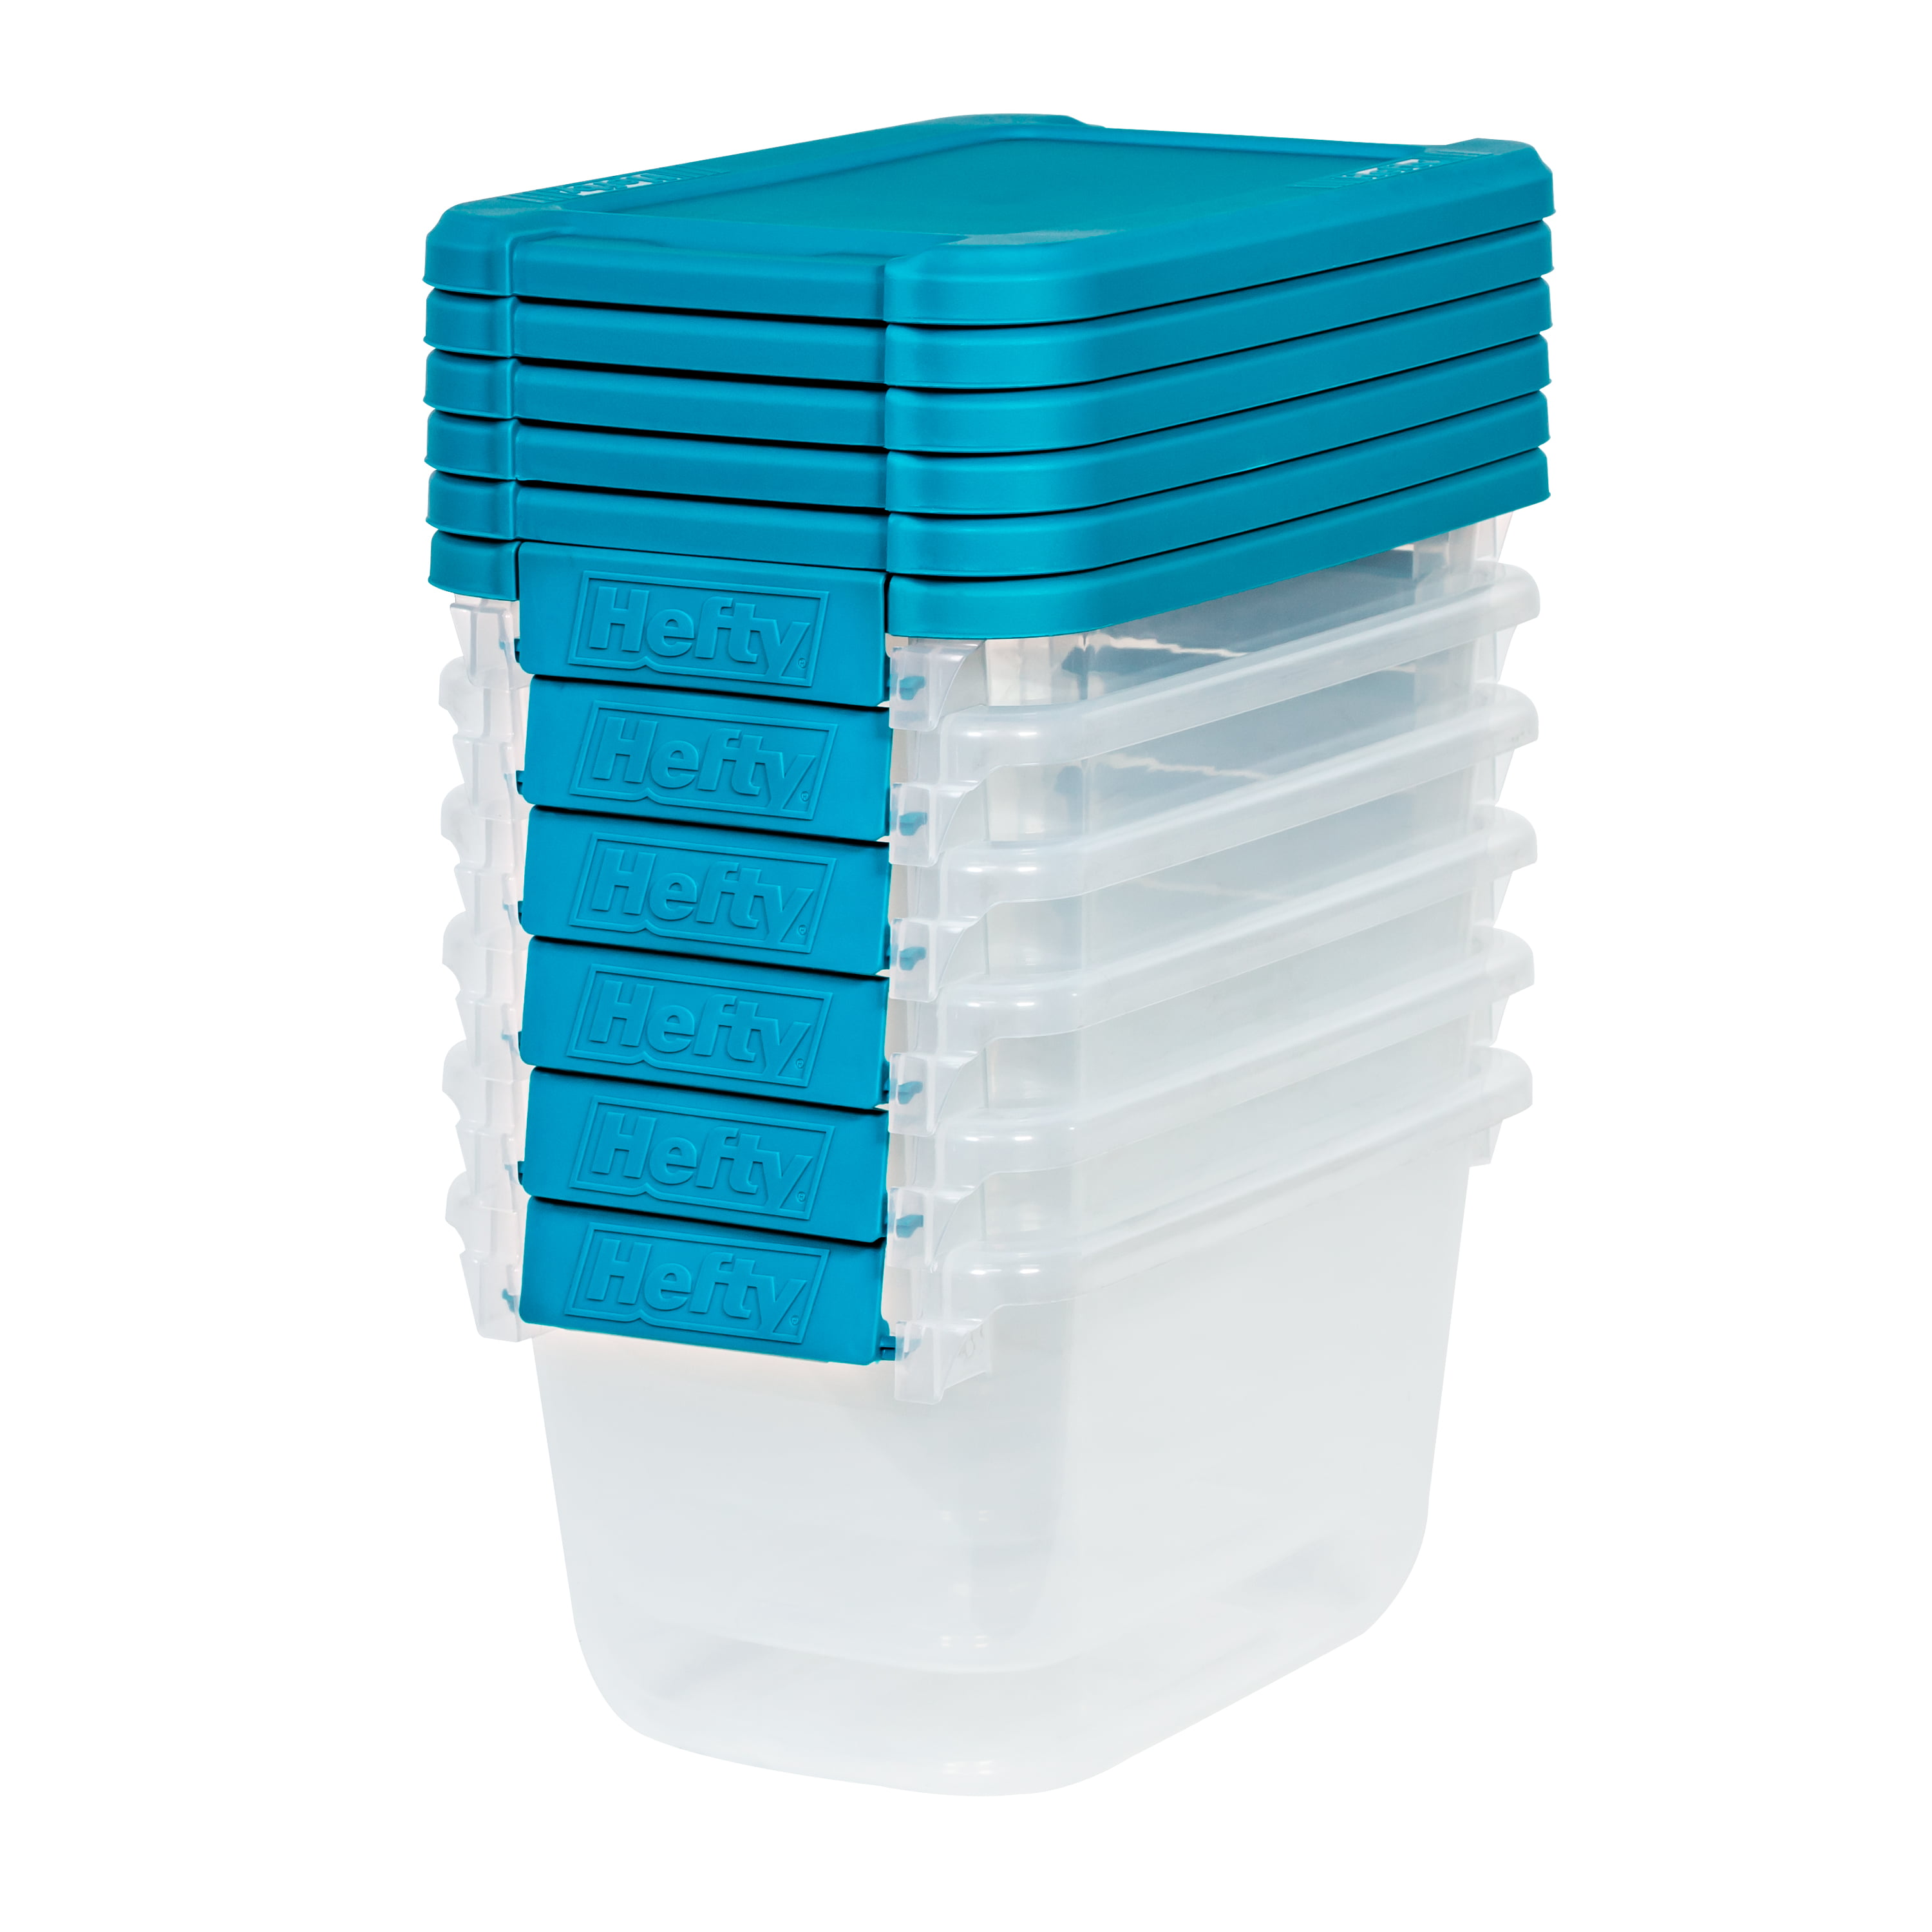 Hefty Hinged Lid Containers - 6 x 6 - 250 ct.